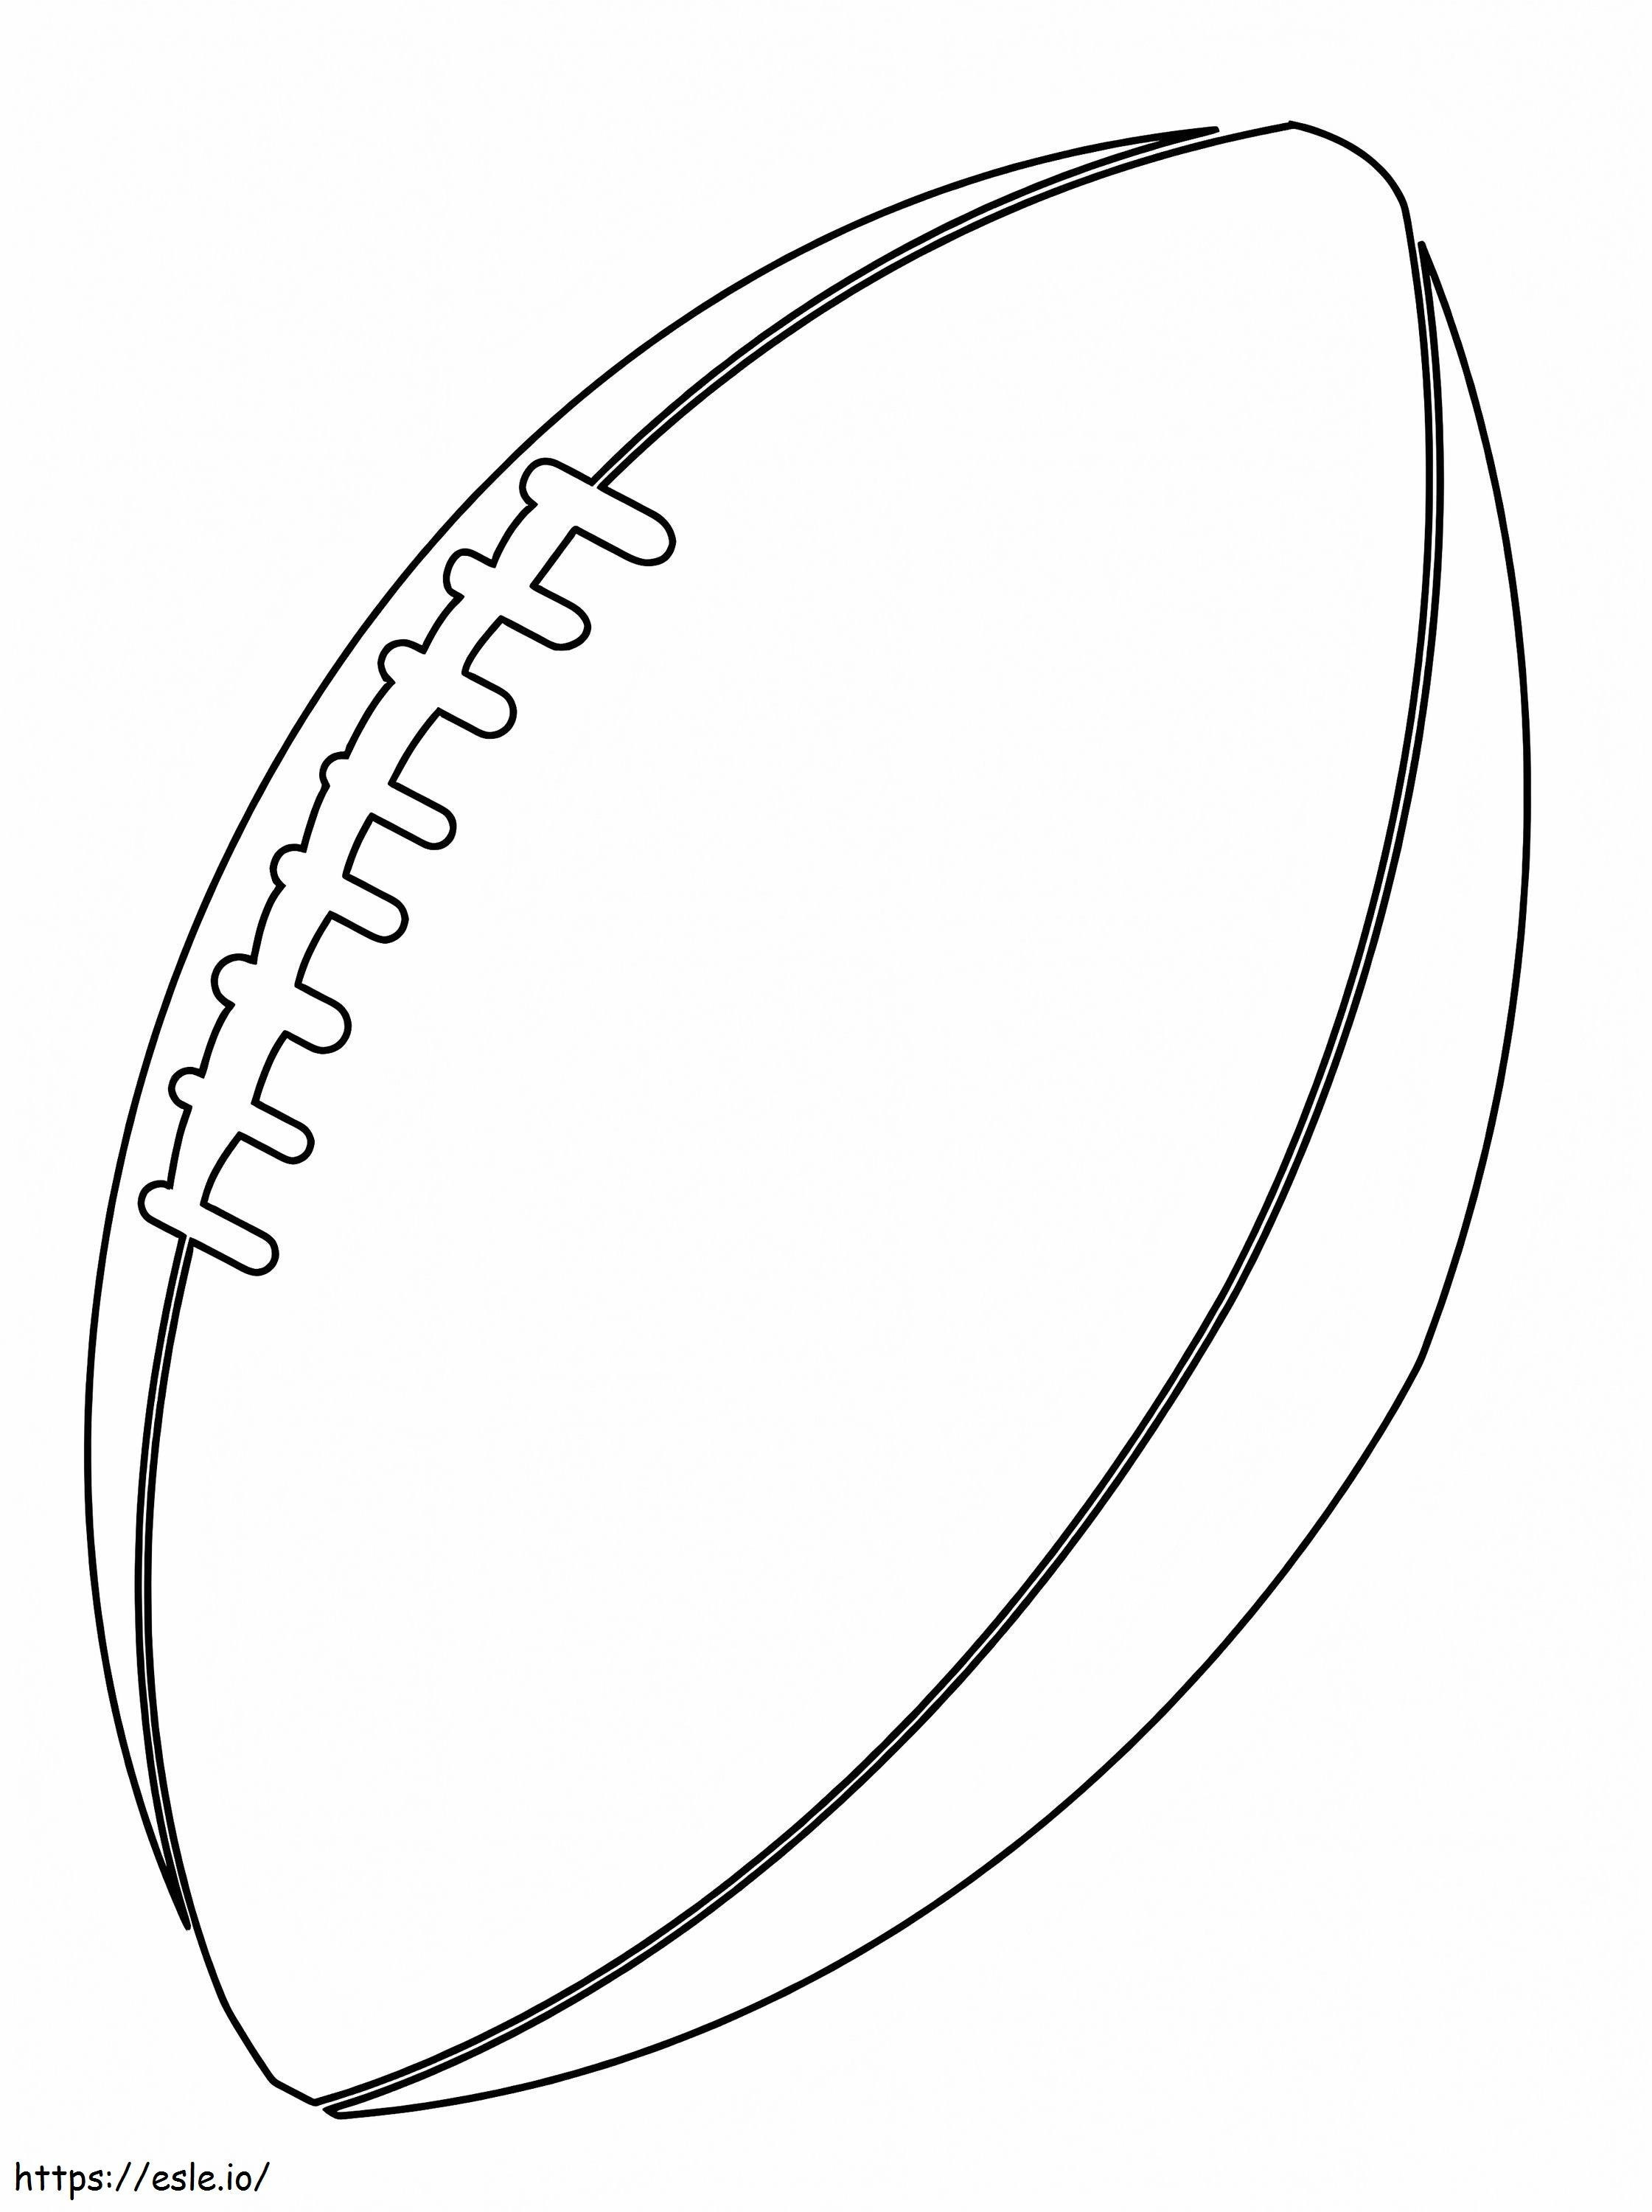 American Football Ball coloring page